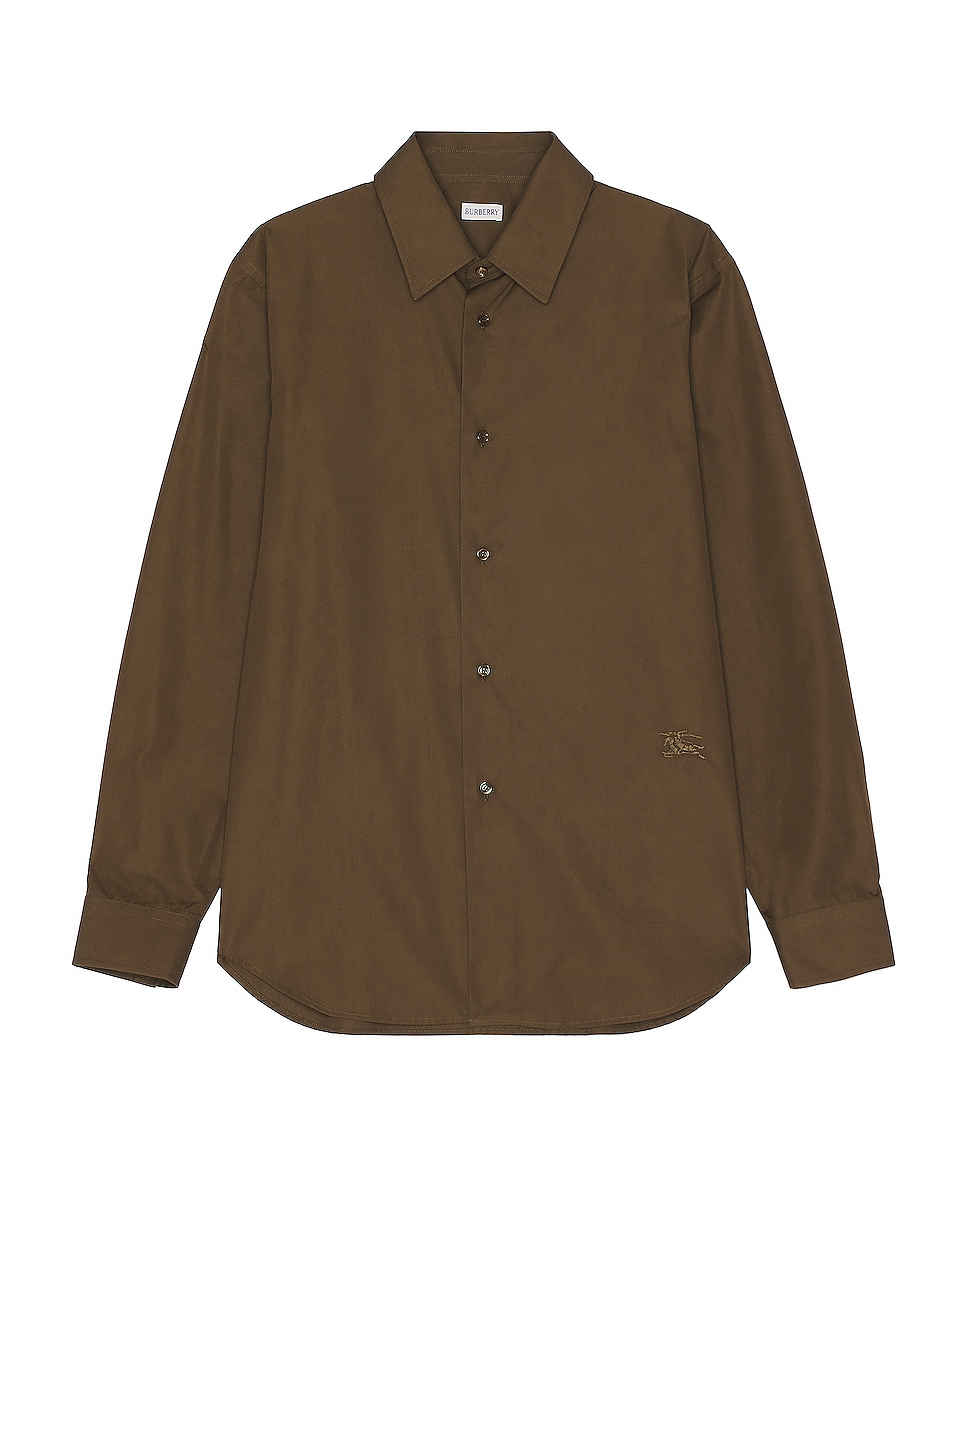 Image 1 of Burberry Button Up Shirt in Military